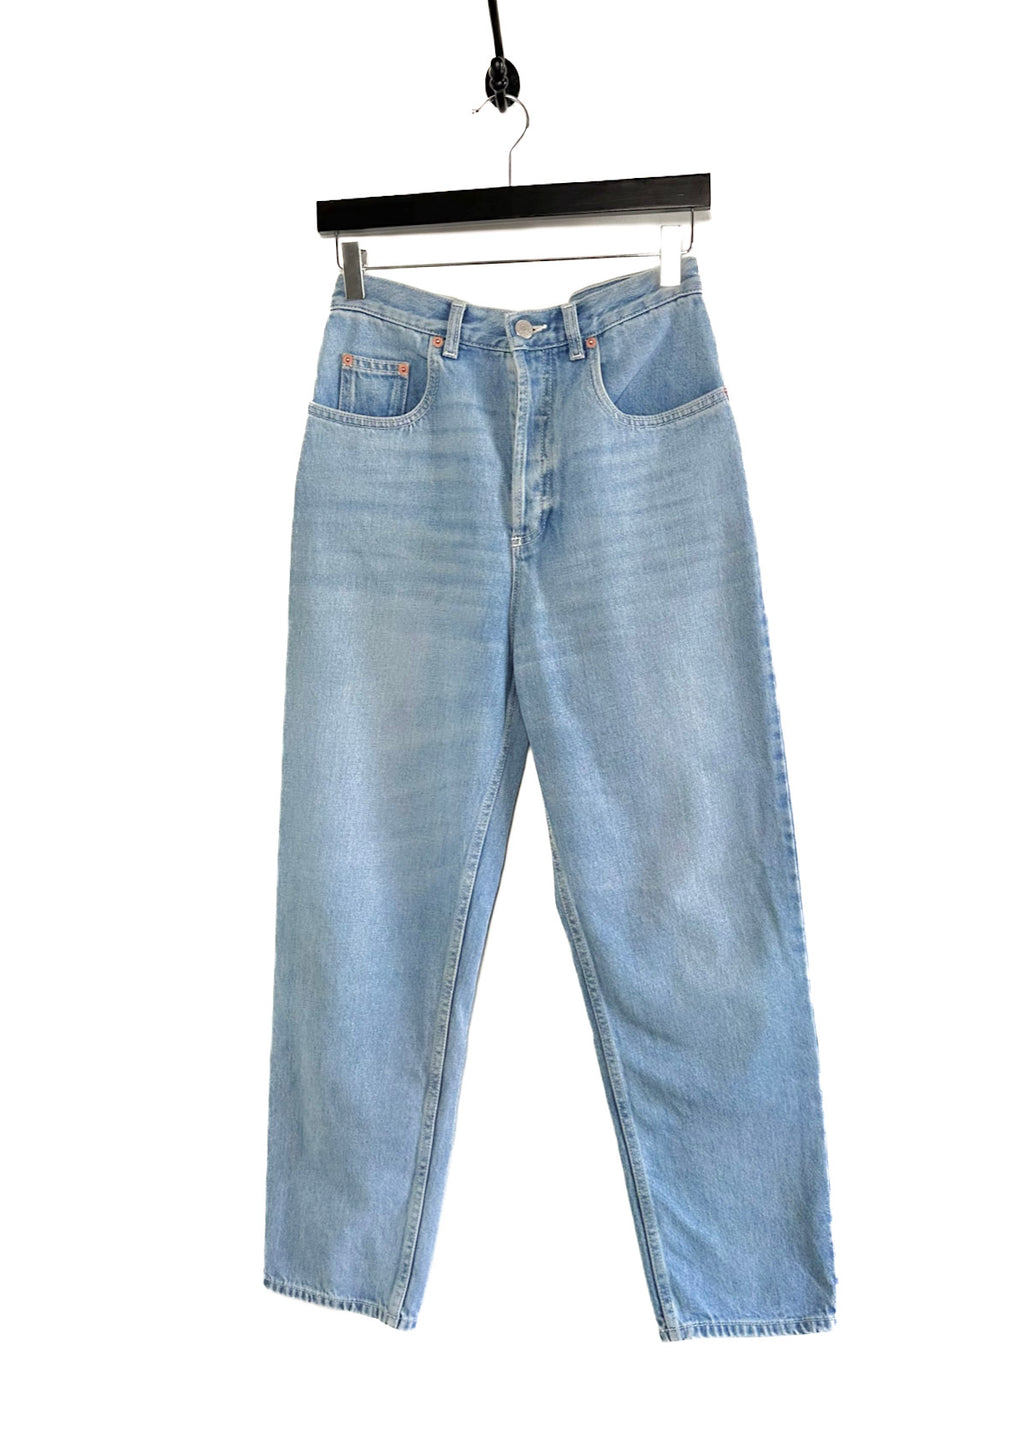 Gucci X Disney Mickey Embroidery Wide Leg Blue Jeans